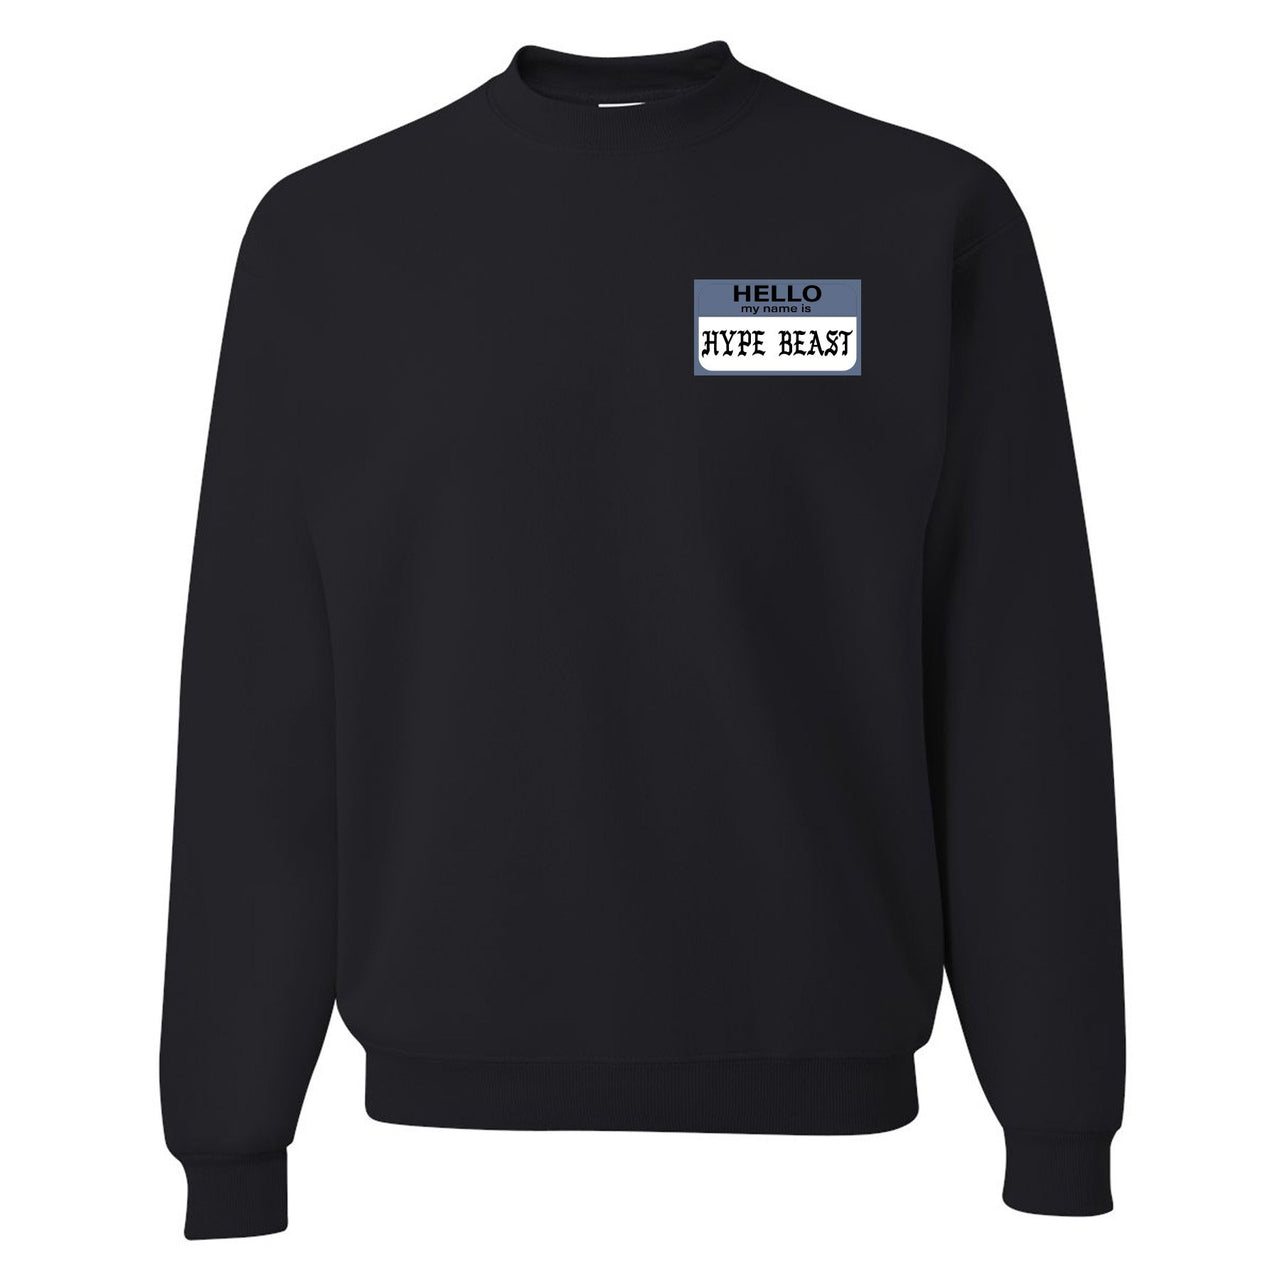 Cap and Gown 13s Crewneck Sweatshirt | Hello My Name is Hype Beast Pablo Style, Black